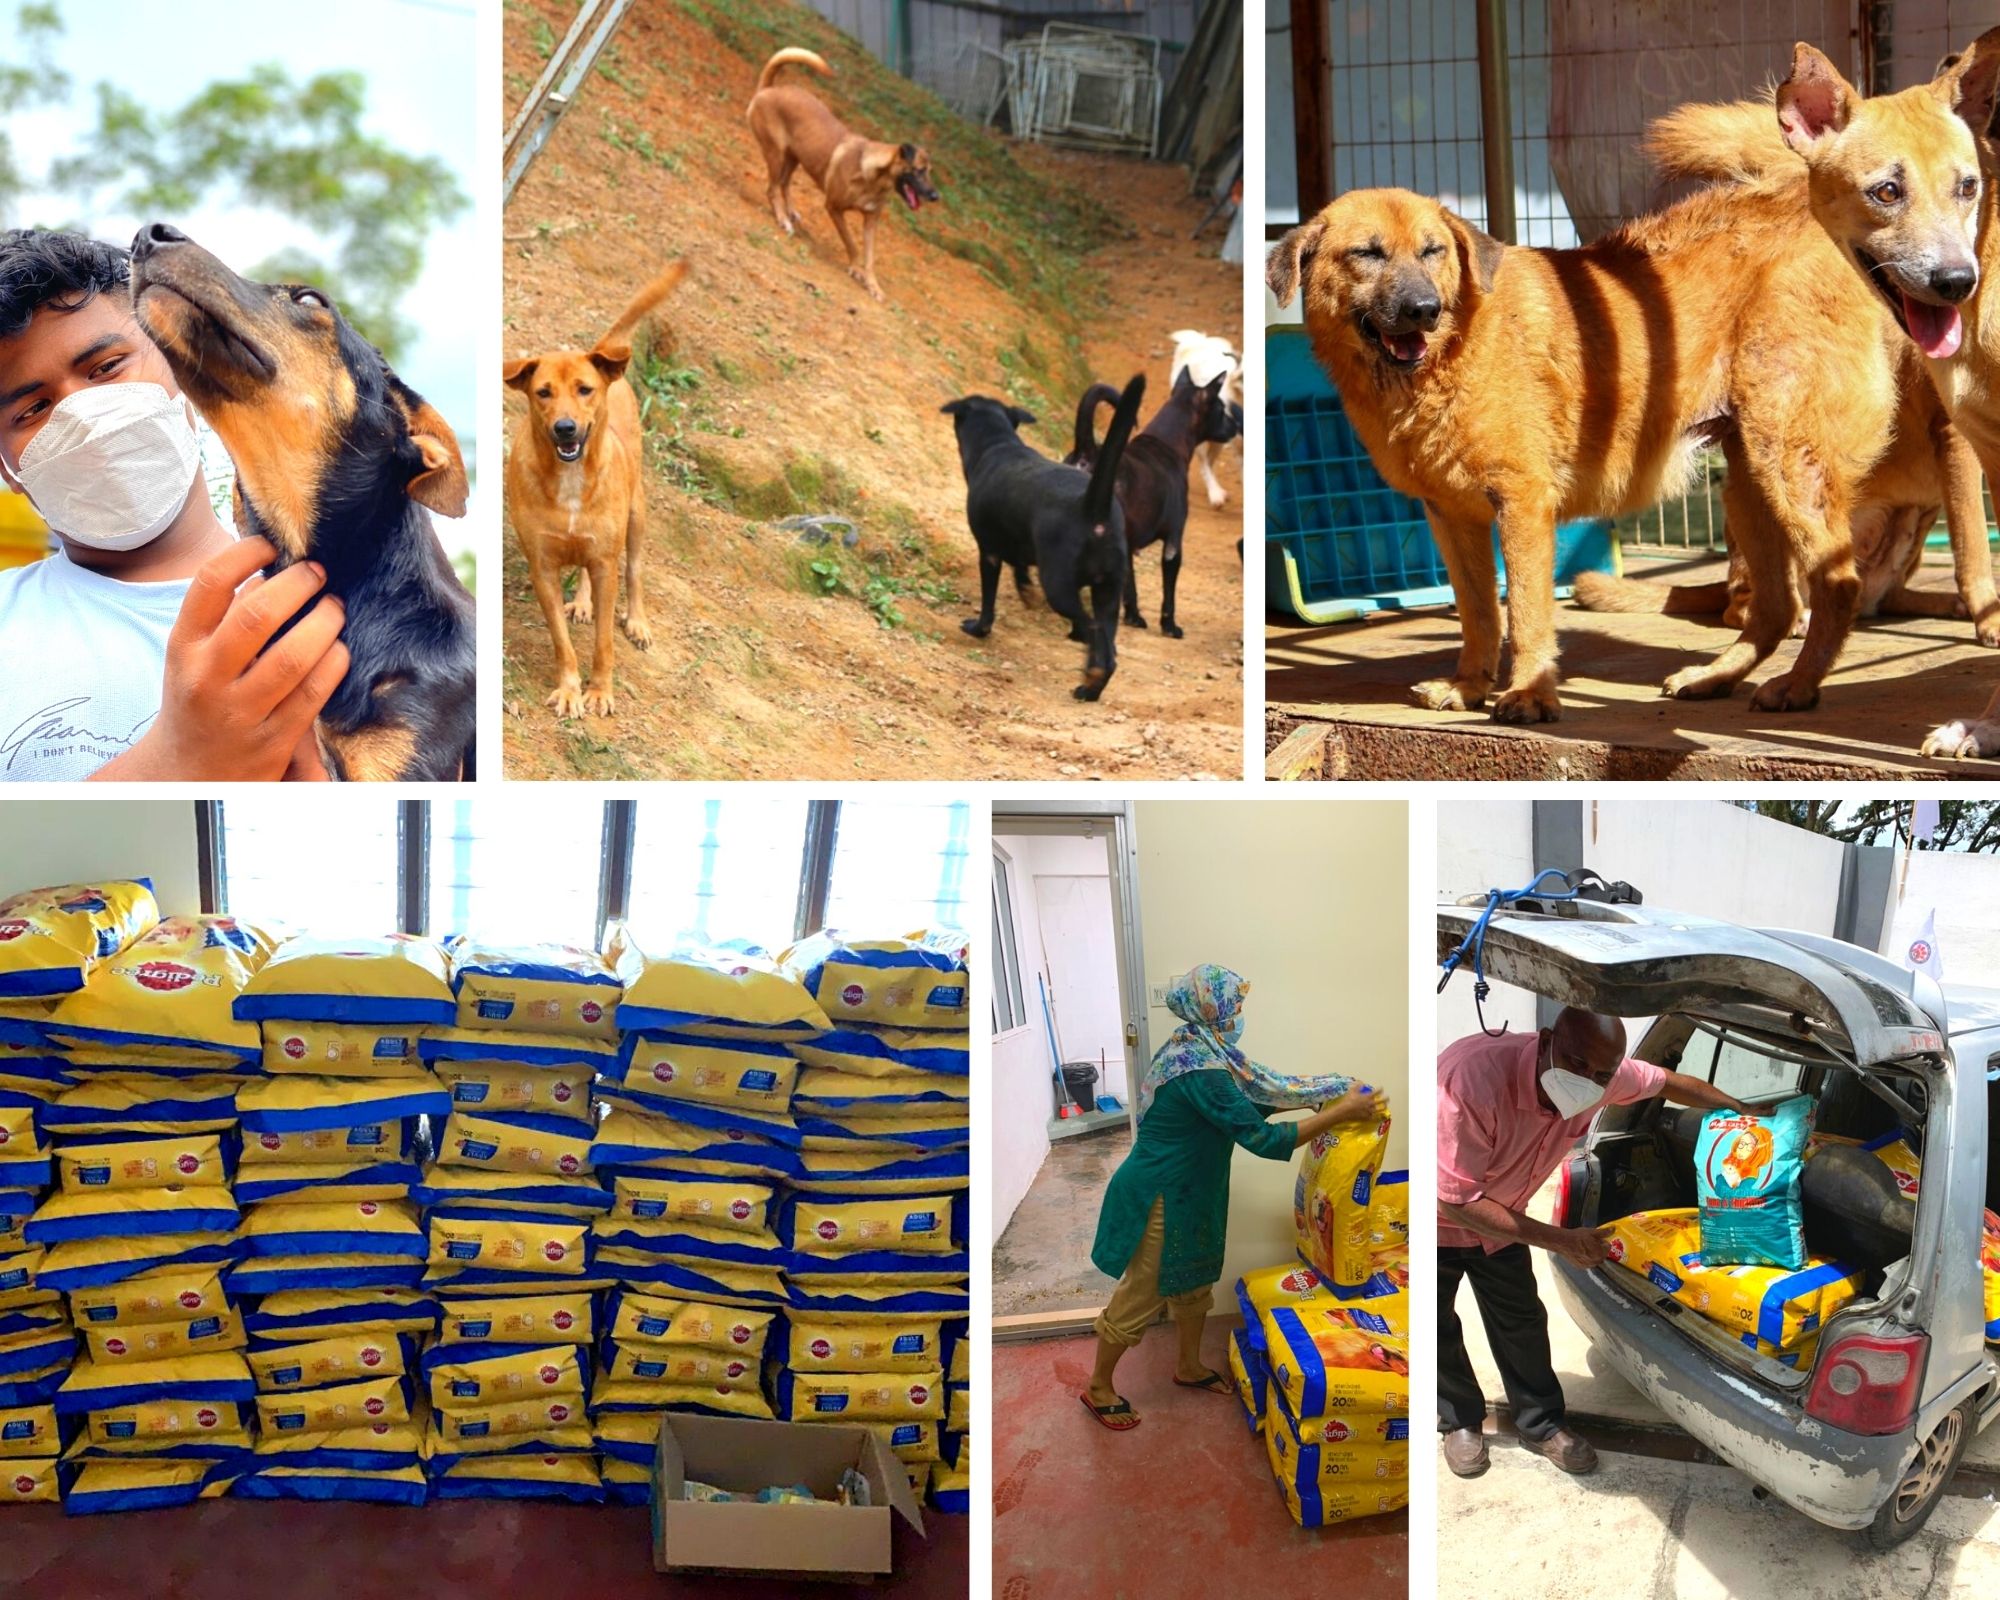 Pedigree® Delivers 61,000 Meals To Fill The Bowls Of Shelter Dogs & Strays